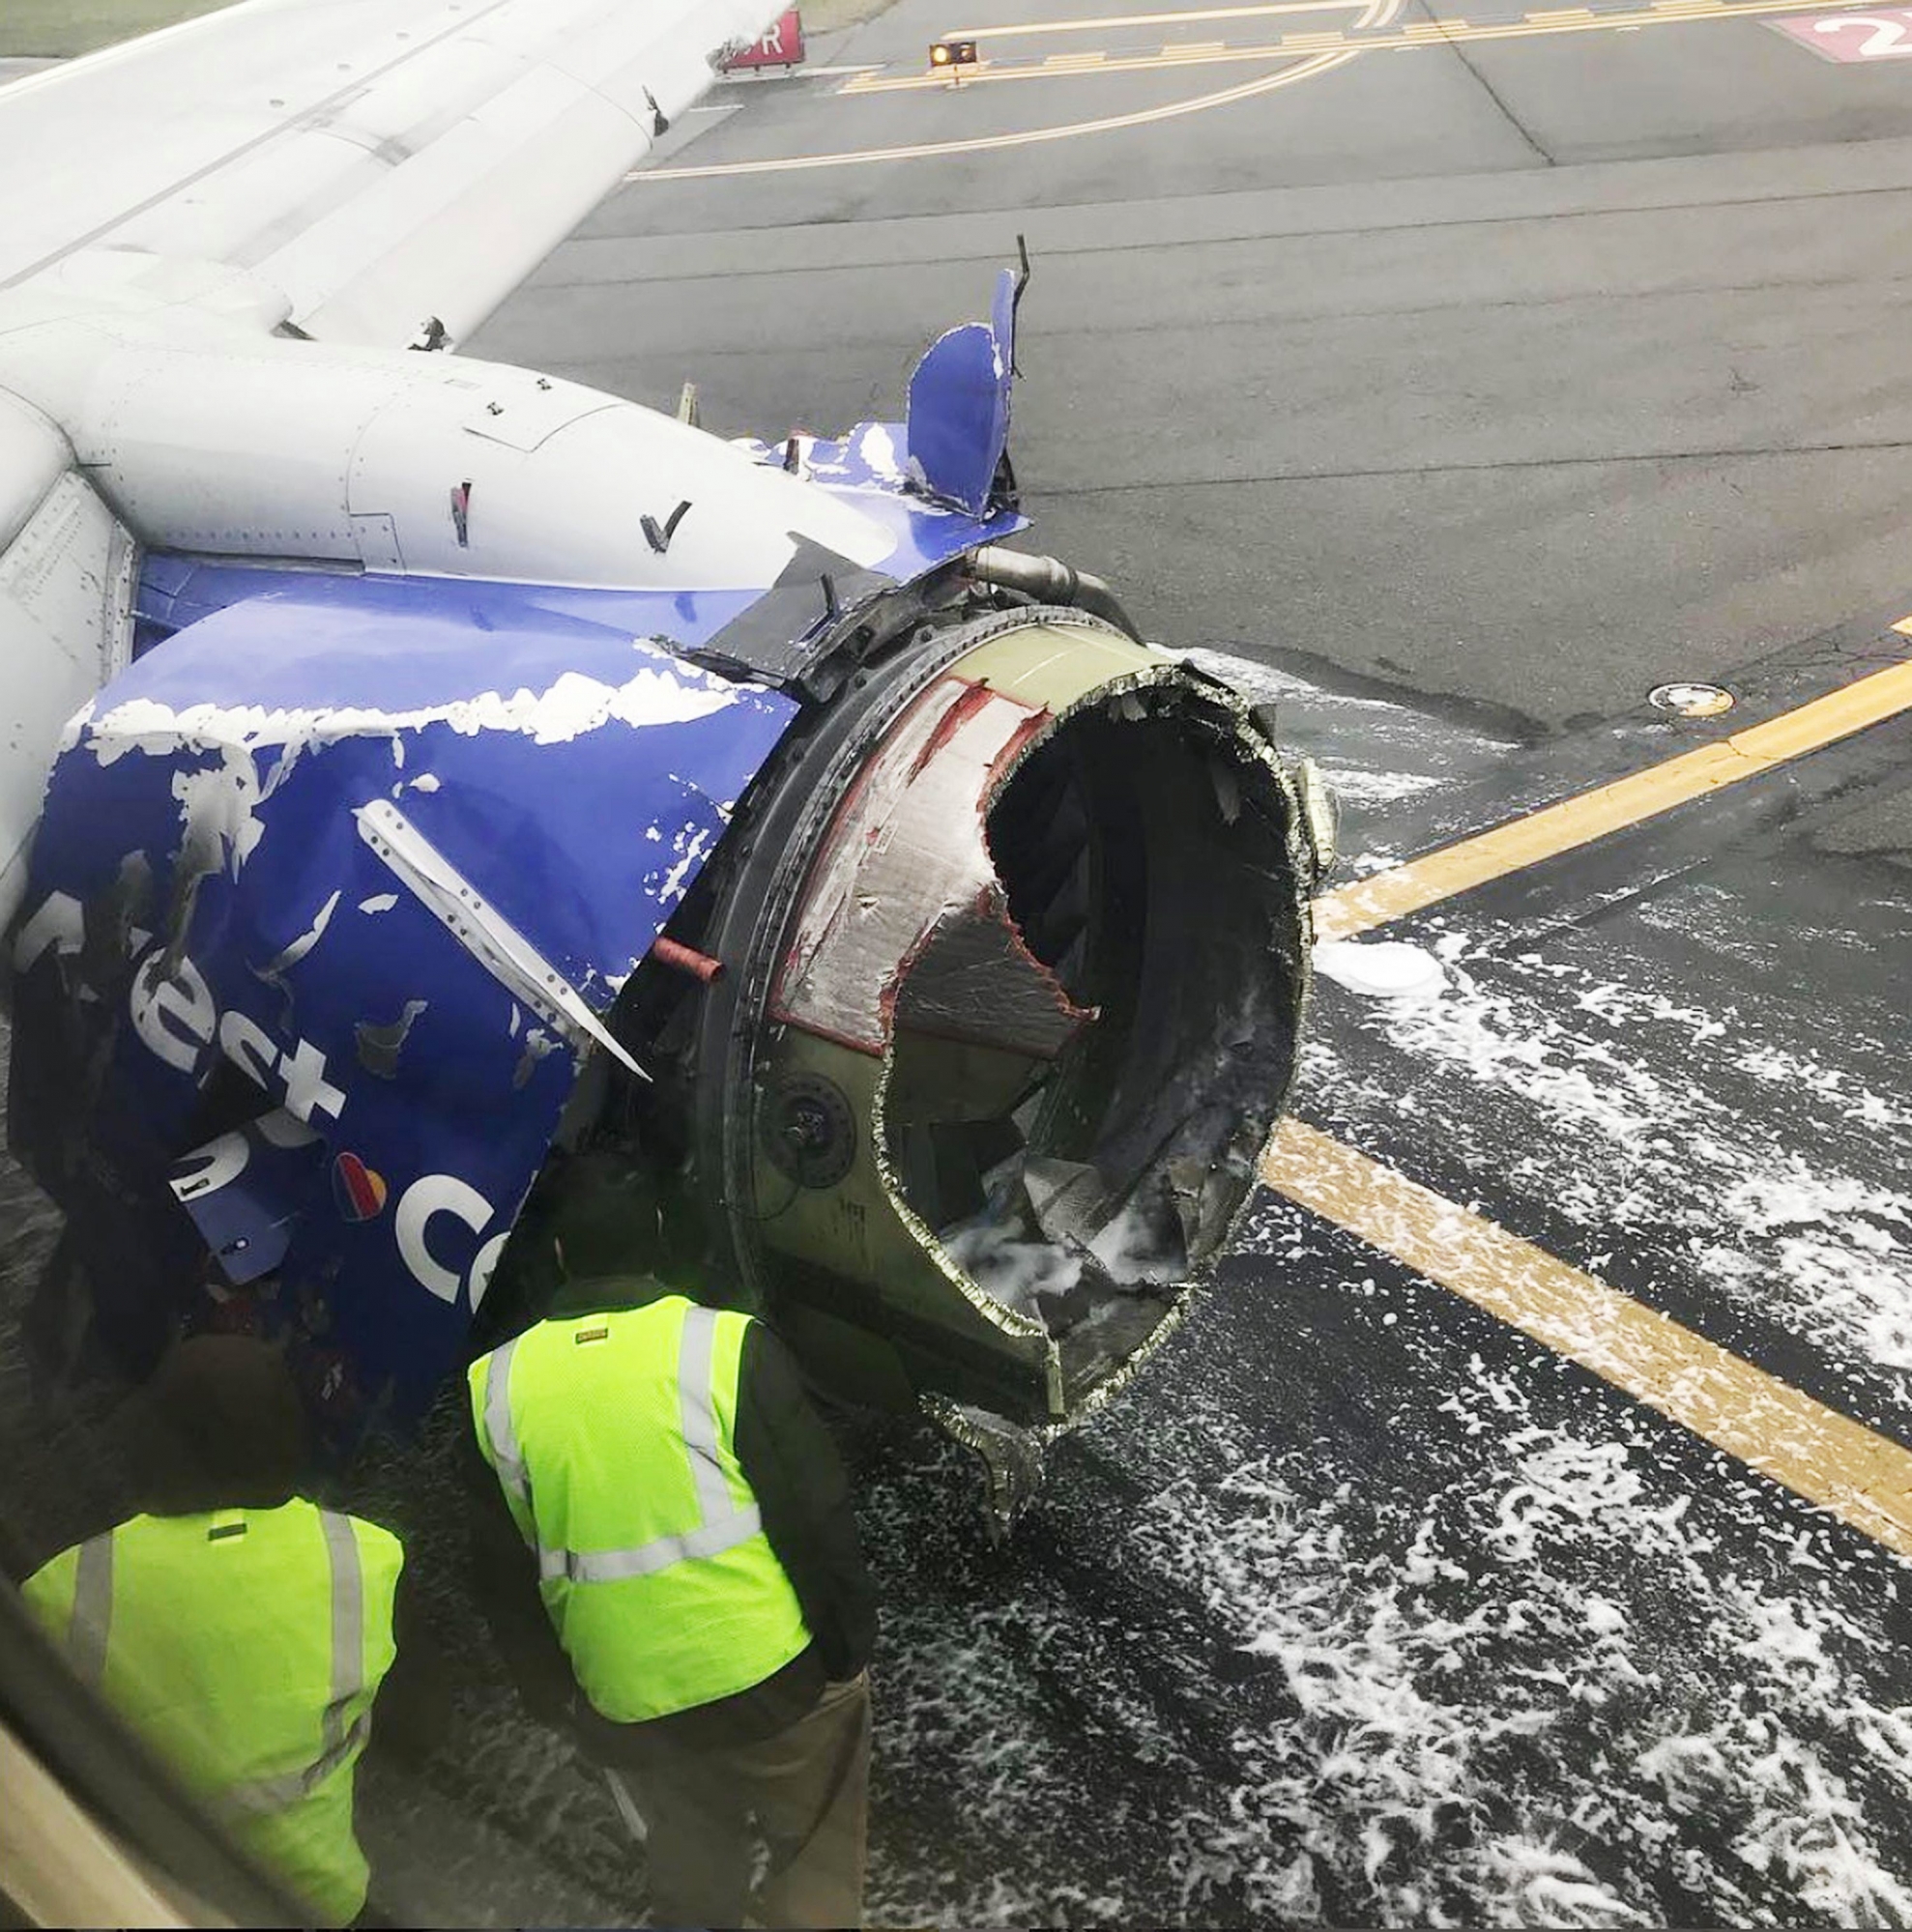 epa06675661 A handout photo made available by Instagram user ABOURMAN showing the damaged engine of Southwest Airlines flight 1380 which was en route from LaGuardia Airport in New York City to Love Field in Dallas, Texas when it exploded in flight sending shrapnel into the fuselage, breaking a window causing the plane to make an emergency landing at Philadelphia Airport in Philadelphia, Pennsylvania, USA, 17 April 2018. Reports indicate one person died as a result of the incident.  EPA/AMANDA BOURMAN / HANDOUT  HANDOUT EDITORIAL USE ONLY/NO SALES USA SOUTHWEST ENGINE EXPLODES